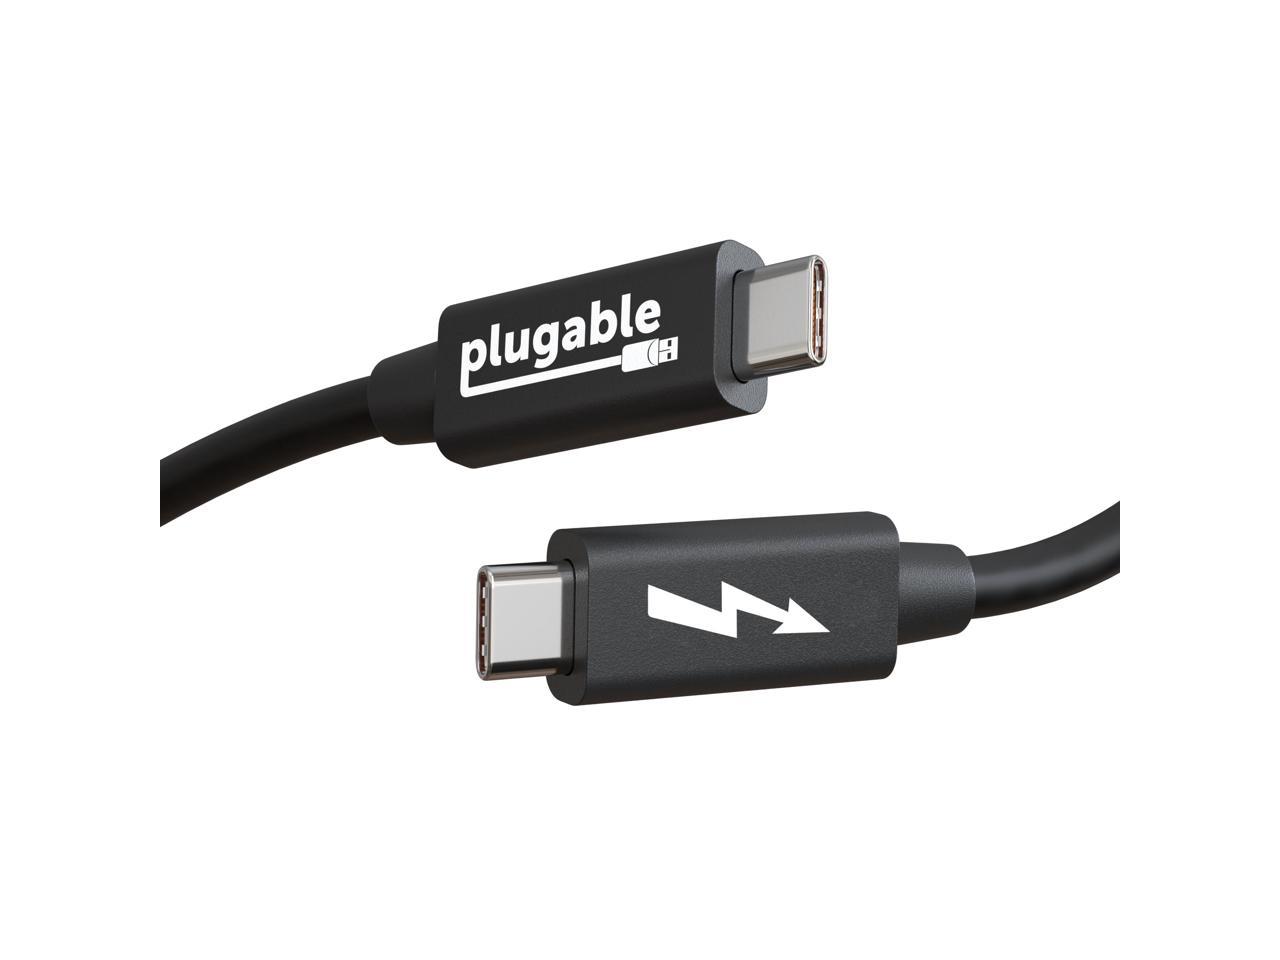 Plugable Windows Transfer Cable 6.6ft (2m), Thunderbolt 10Gbps, Bundled with Bravura Software for Windows PC to PC Migration - Unlimited Uses. Works between Thunderbolt 3 / 4, USB4 PCs - image 1 of 13